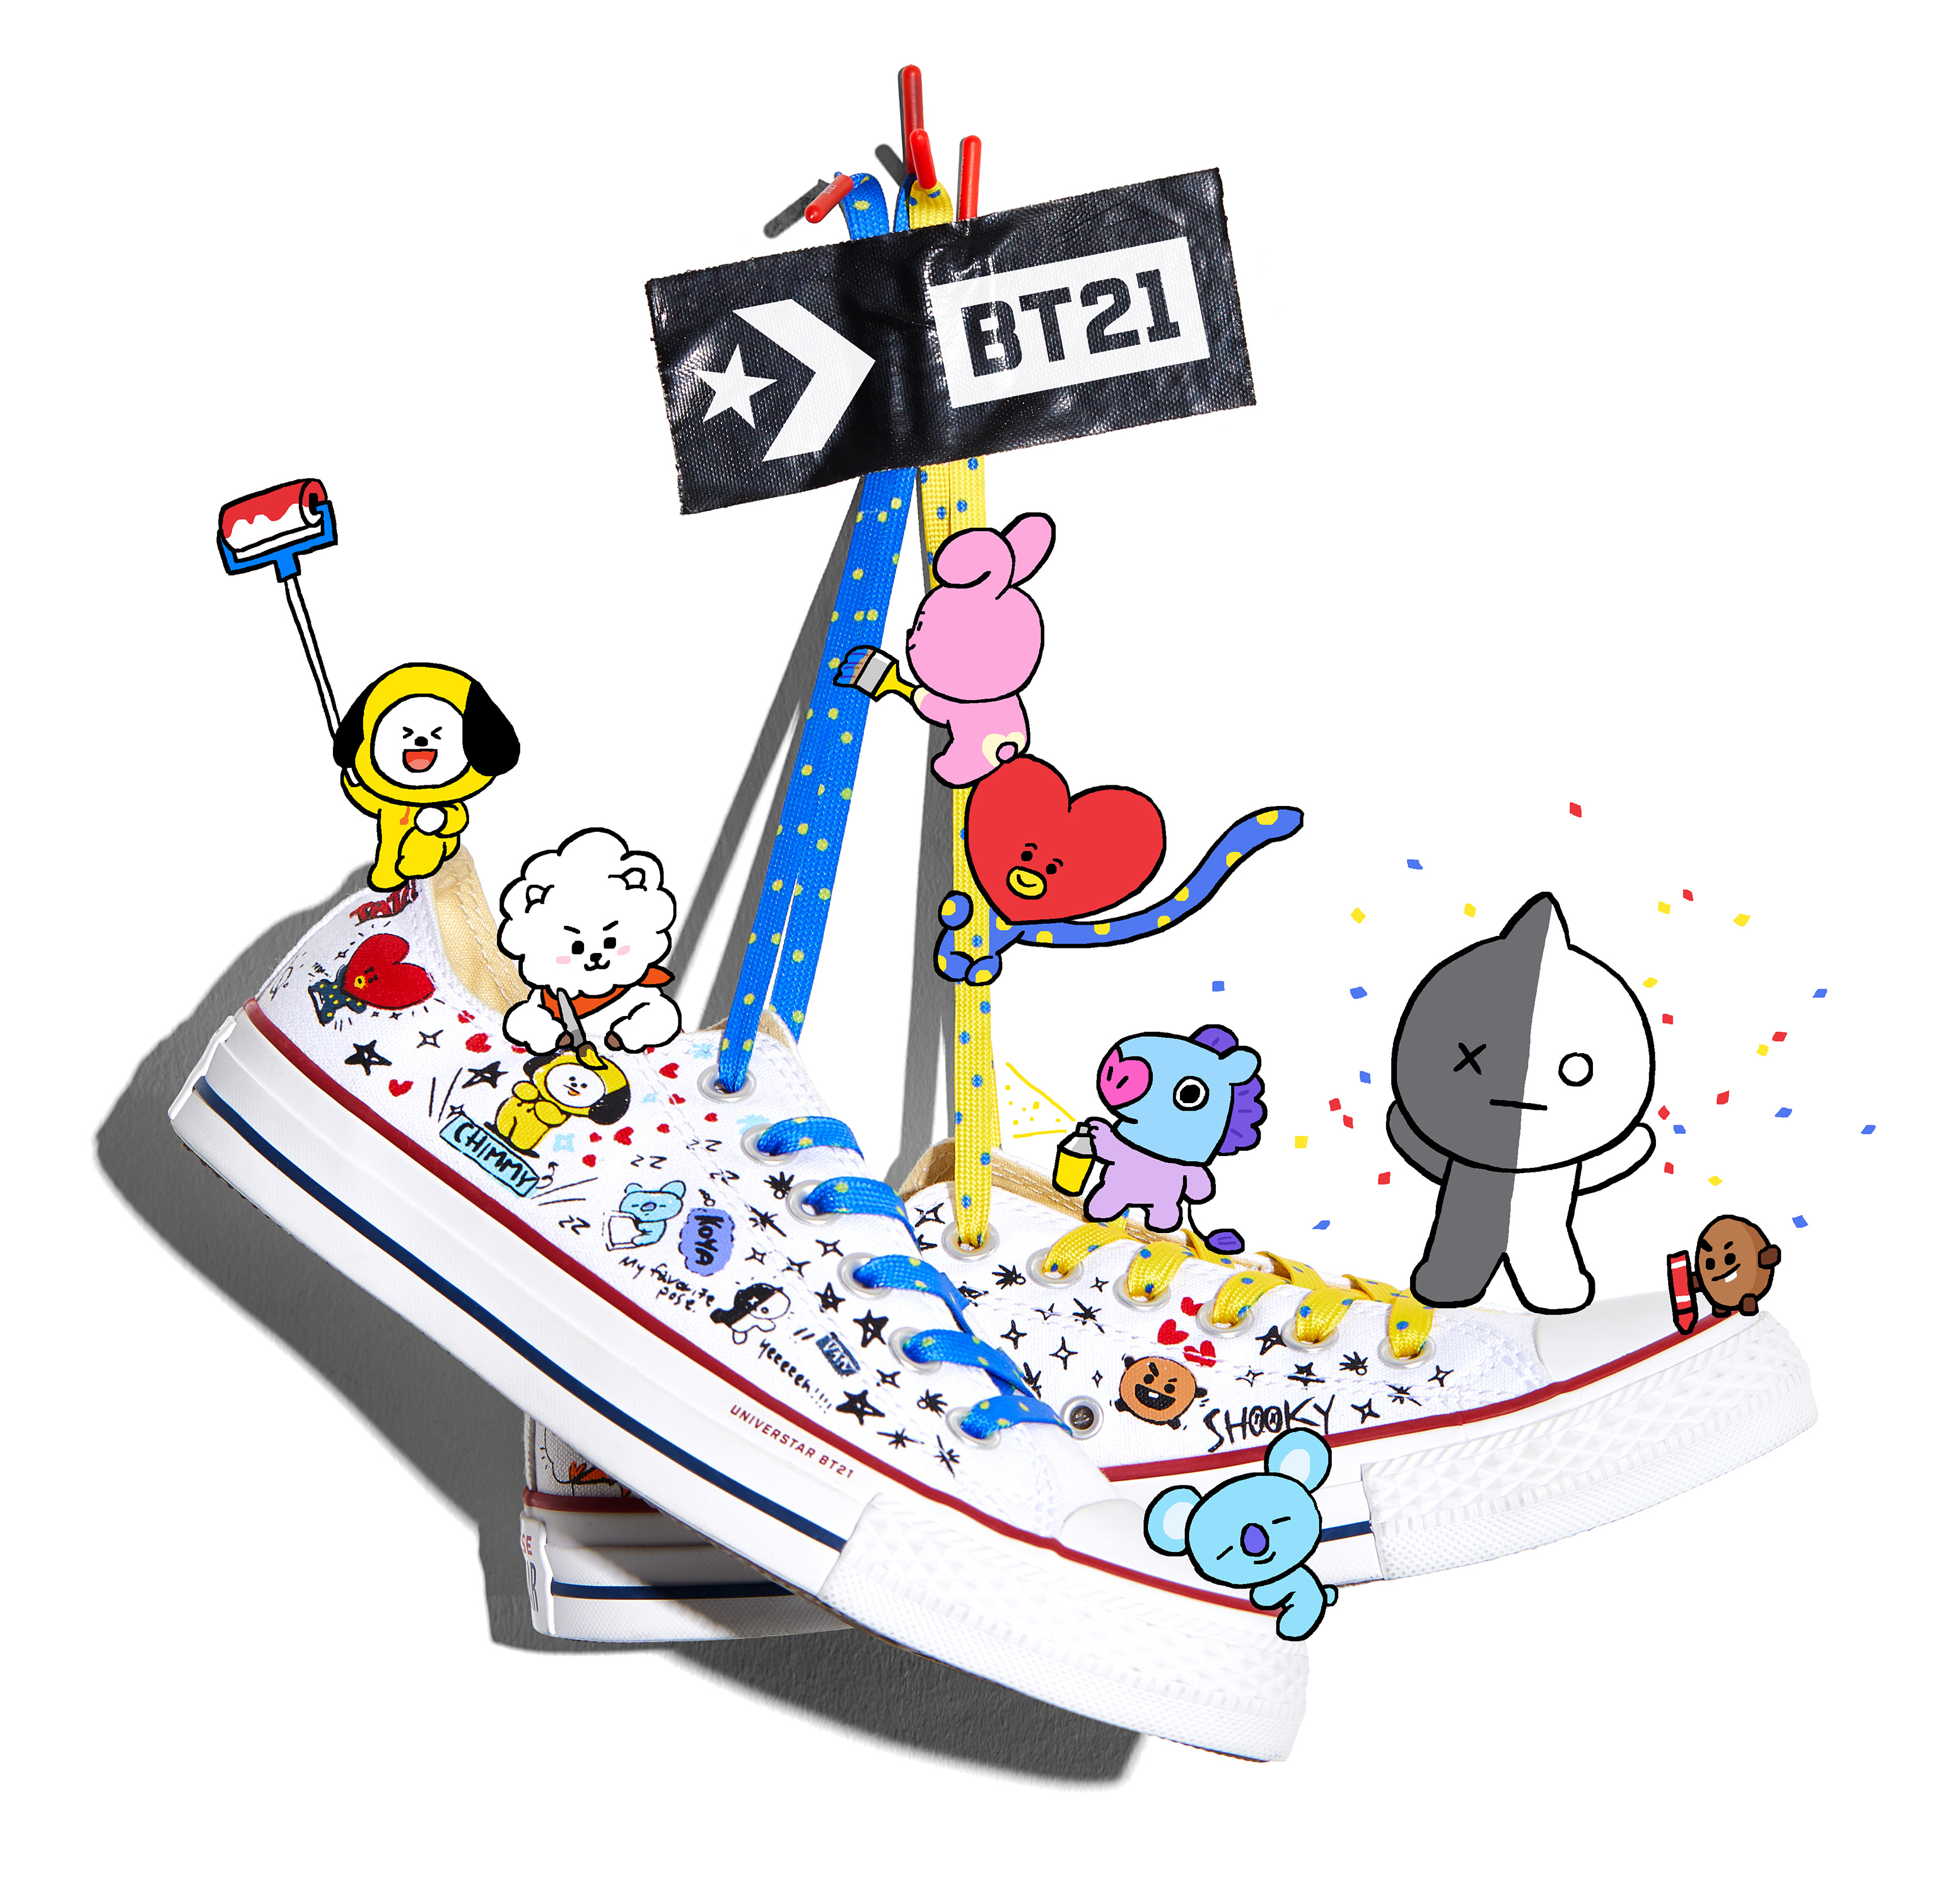 Discover more than 249 bt21 shoes latest